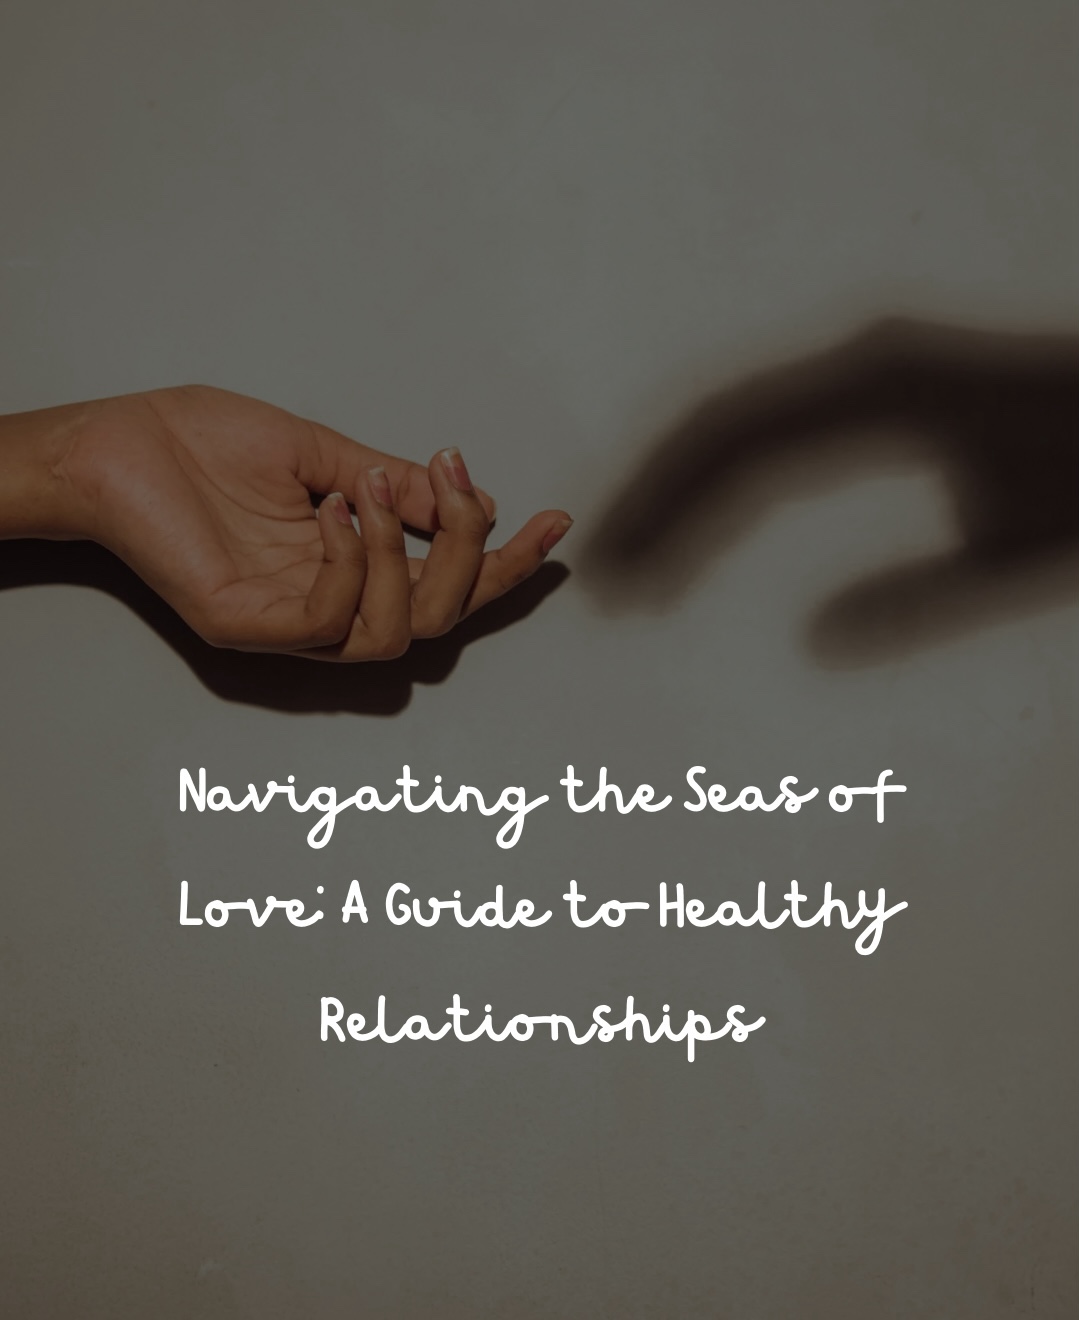 Navigating the Seas of Love: A Guide to Healthy Relationships